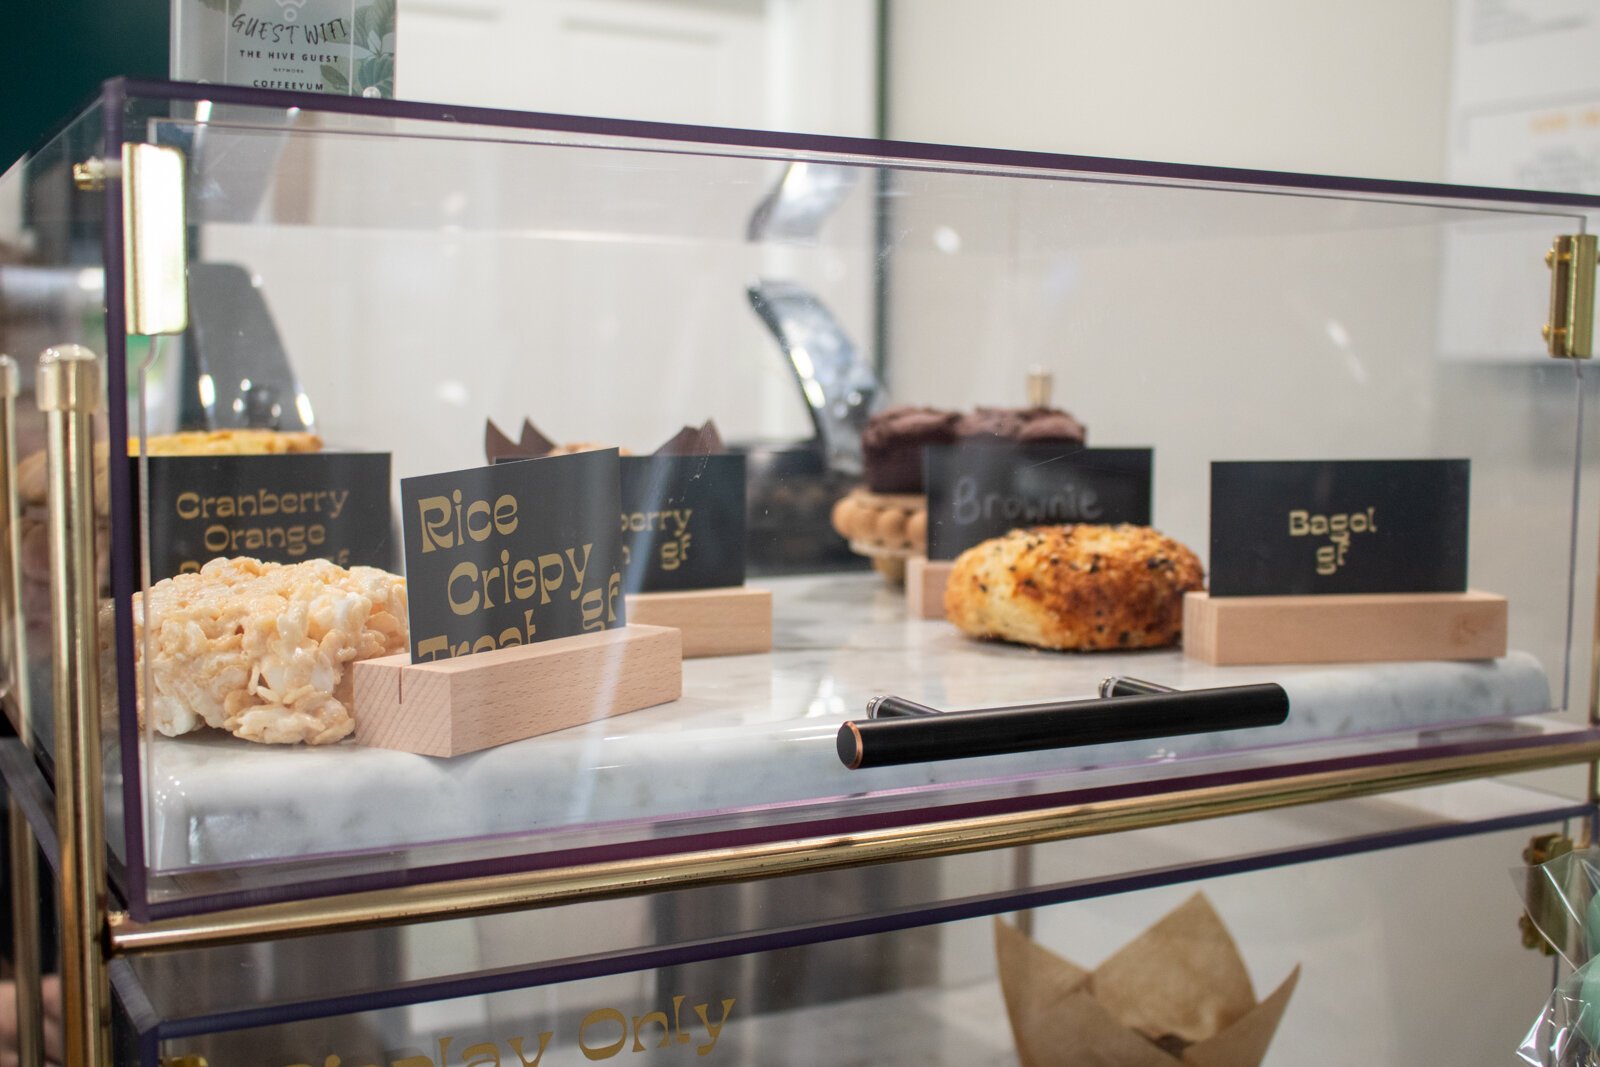 The display case at The Hive features many gluten-free options.